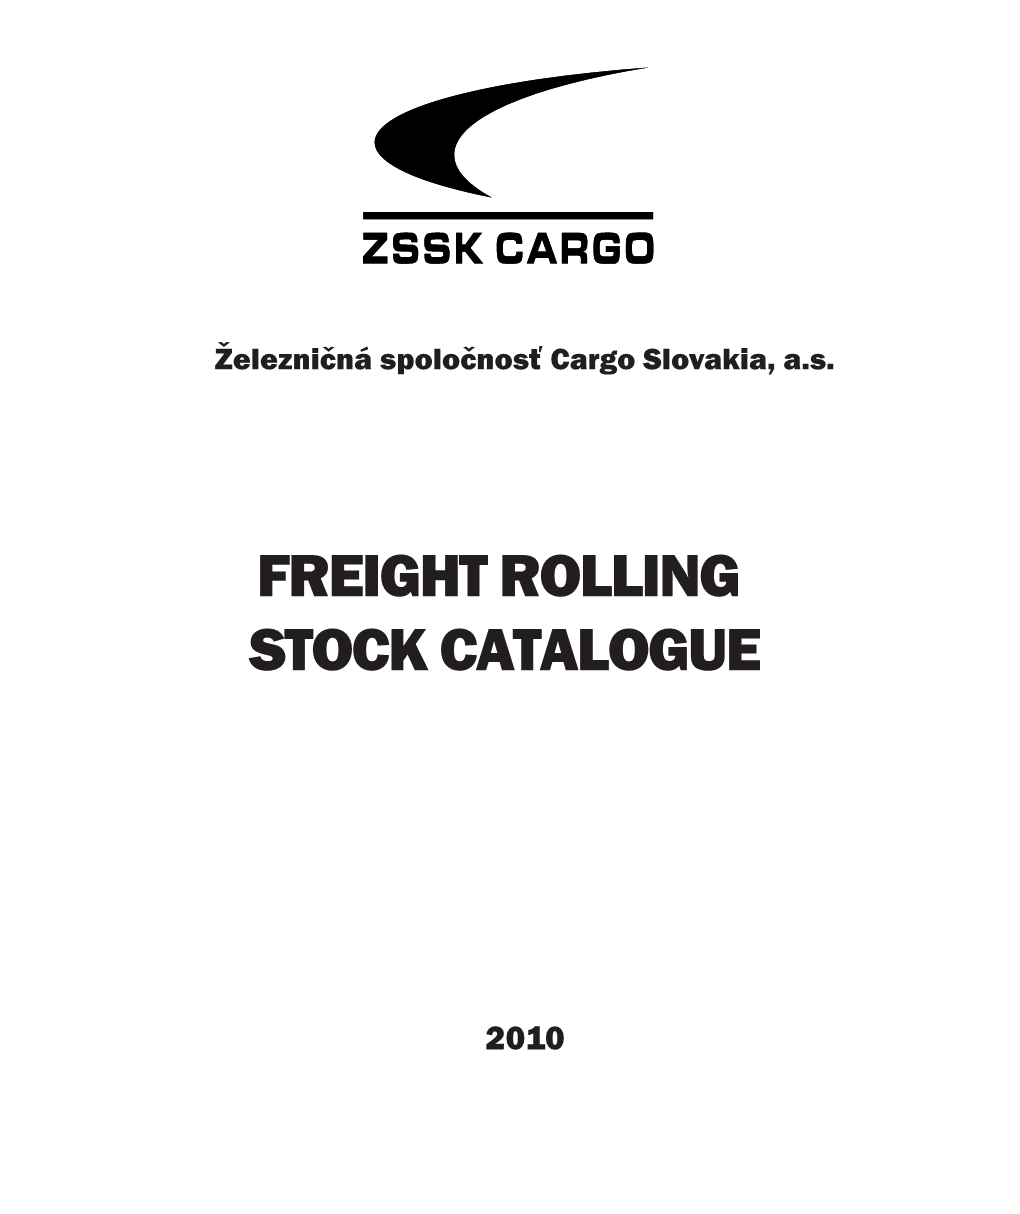 Freight Rolling Stock Catalogue 2010